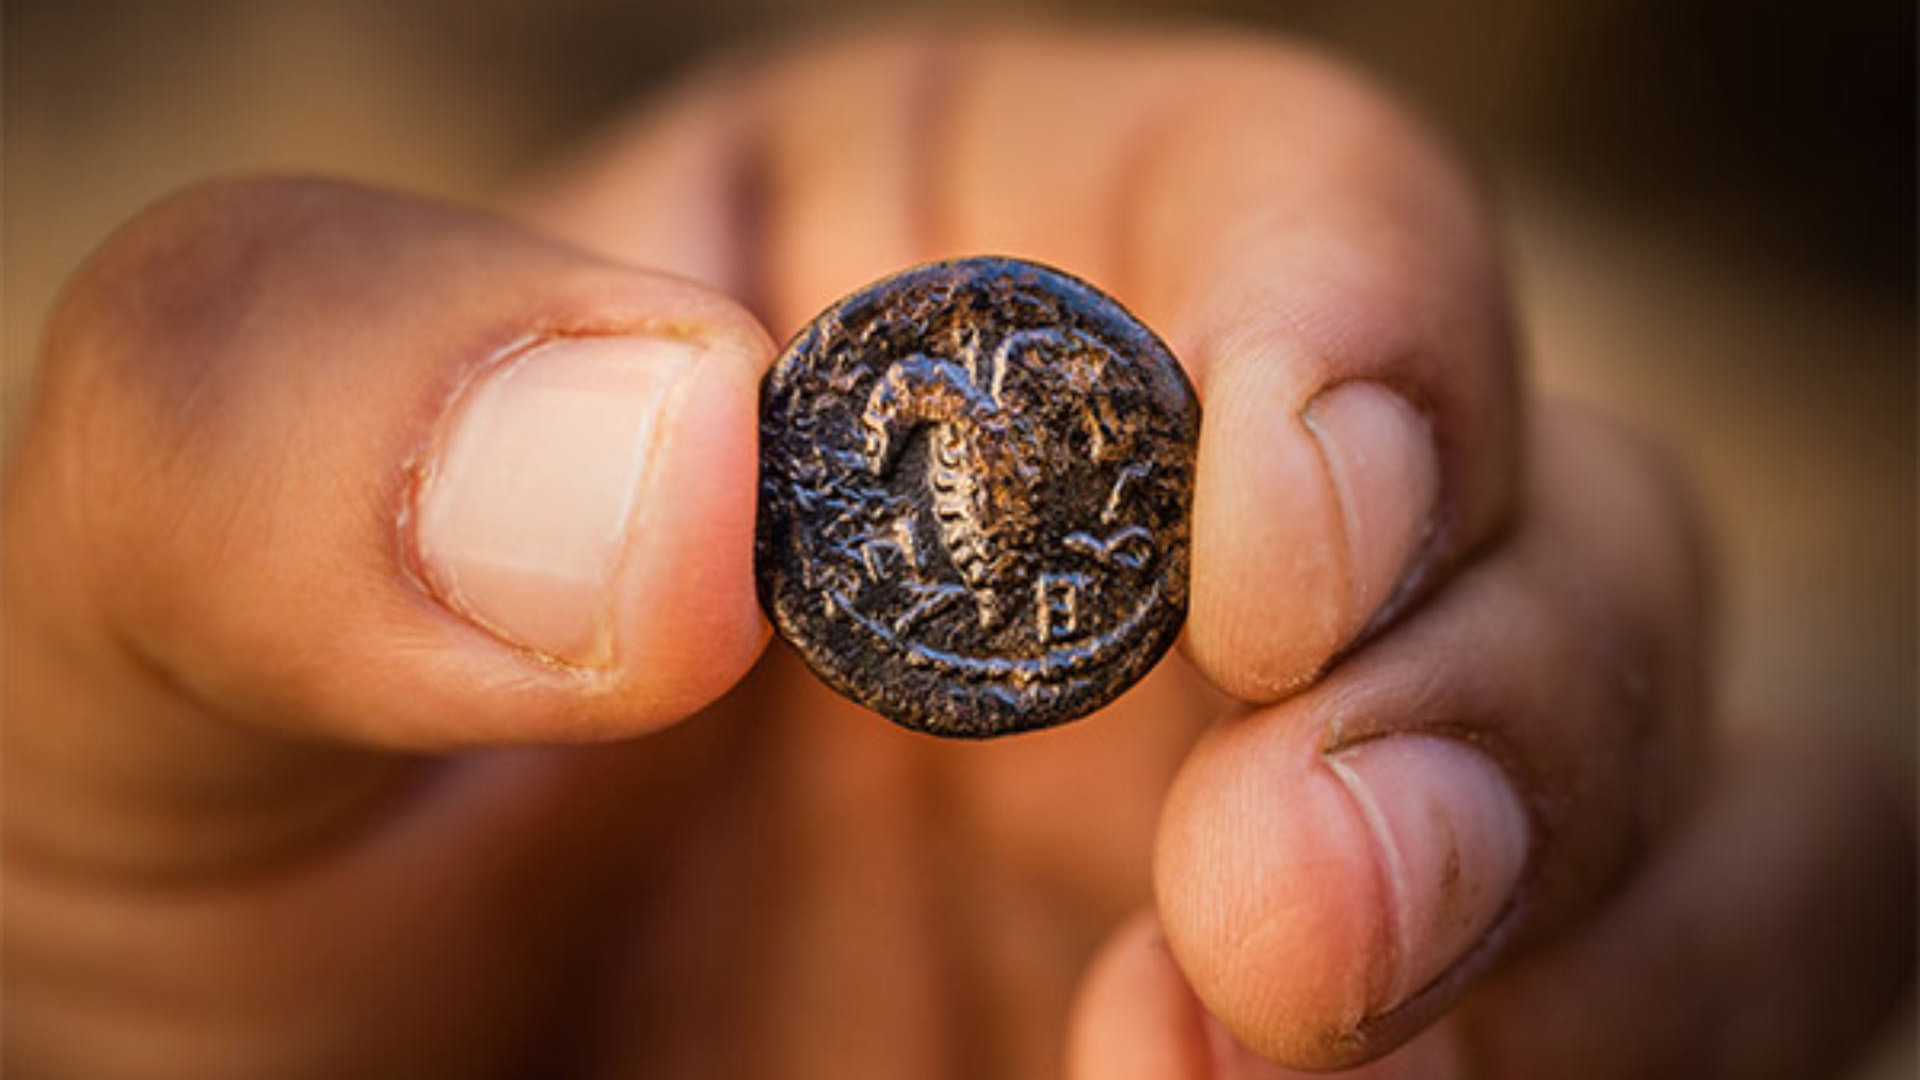 Israeli Archaeologists discovers Rare 1,900-Year-Old Coin from Bar Kochba Revolt